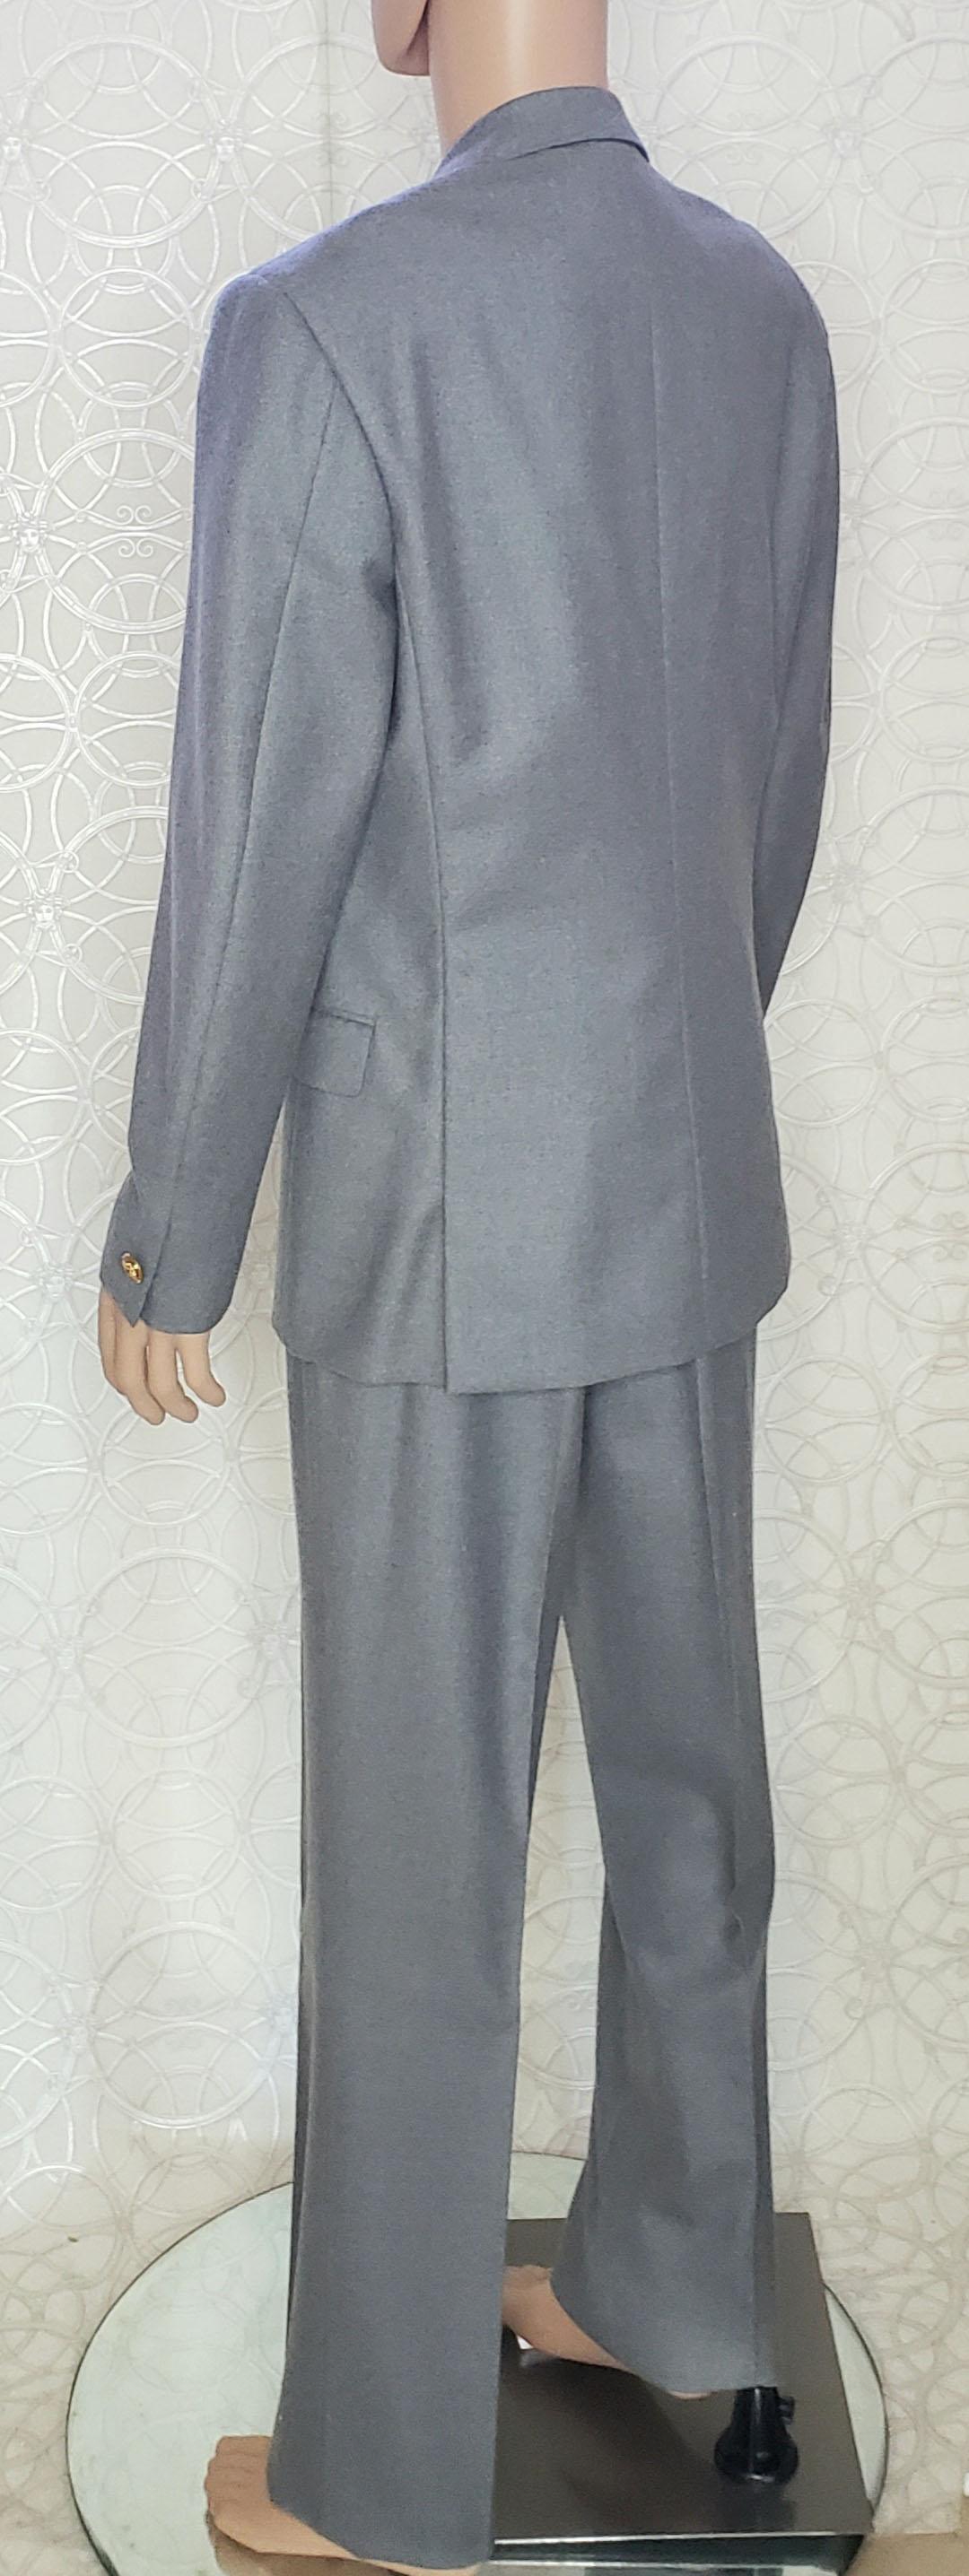 VERSACE F/W 2013 look # 45 BRAND NEW GRAY WOOL SUIT 48 - 38 (M) For Sale 1